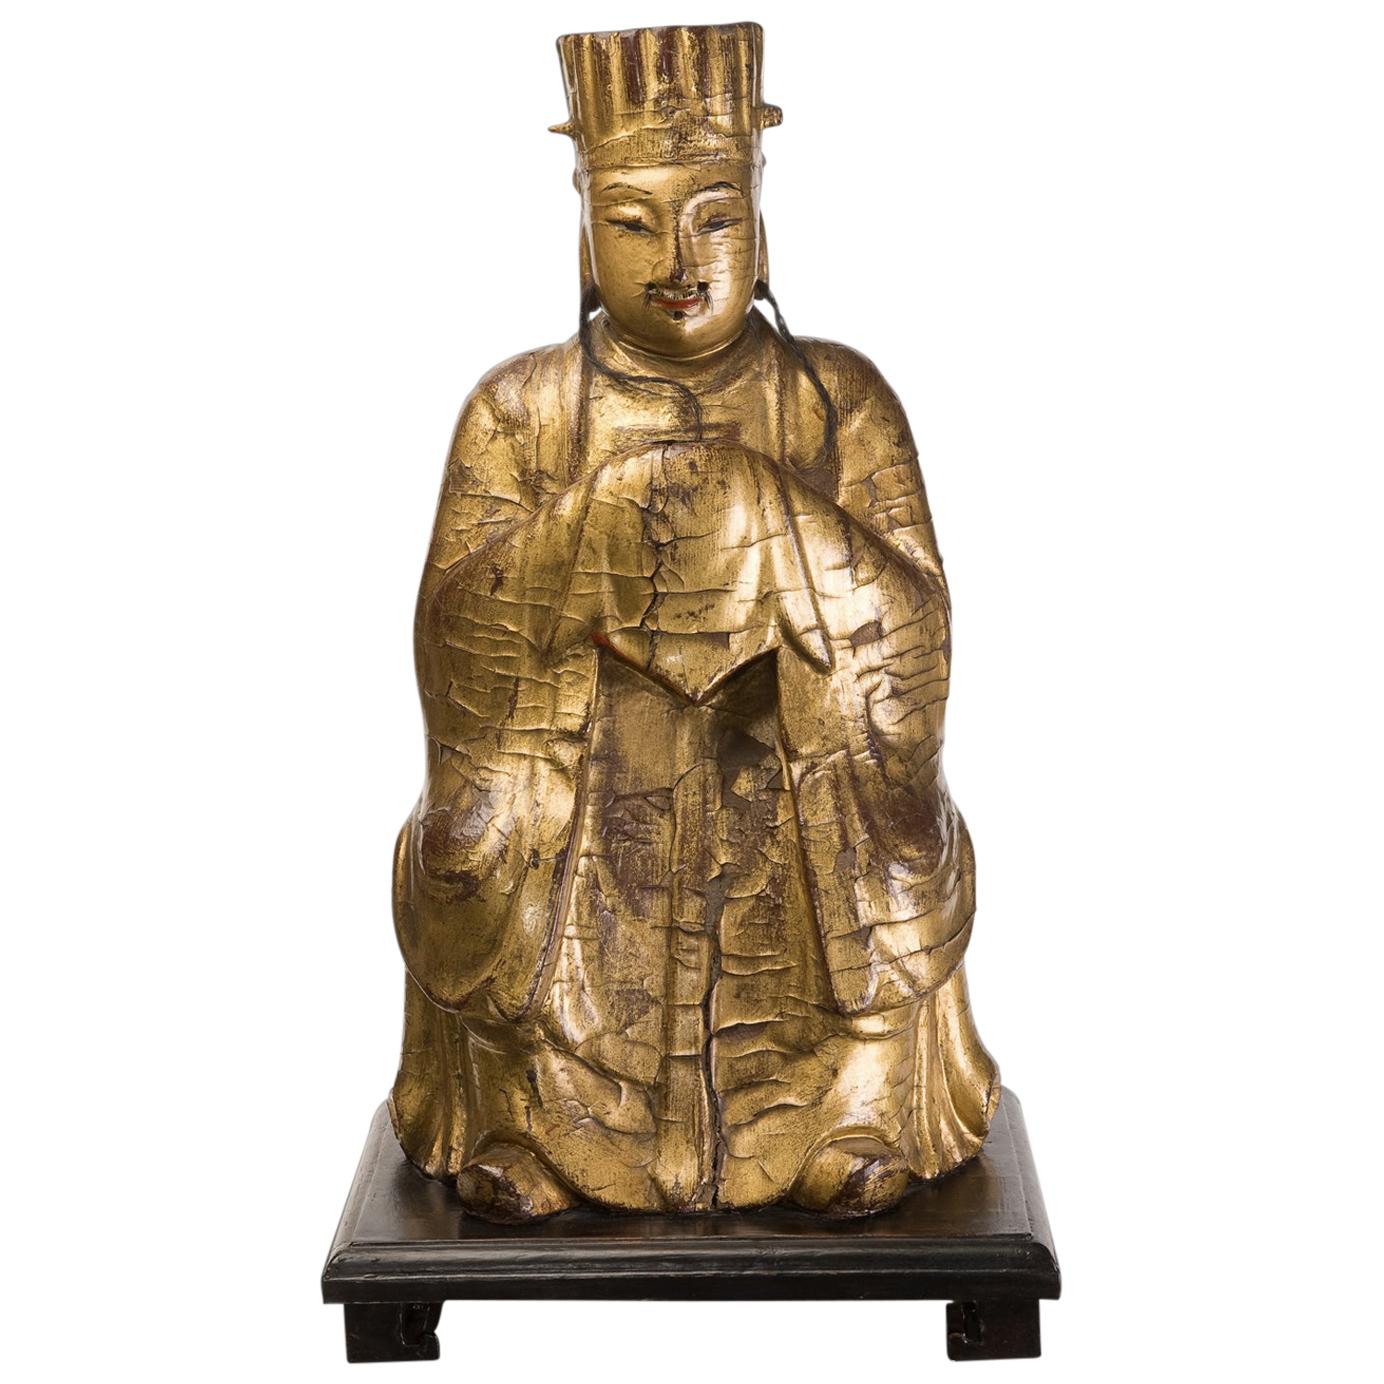 Chinese Dignatary Figure in Gilded and Painted Wood, 18th Century